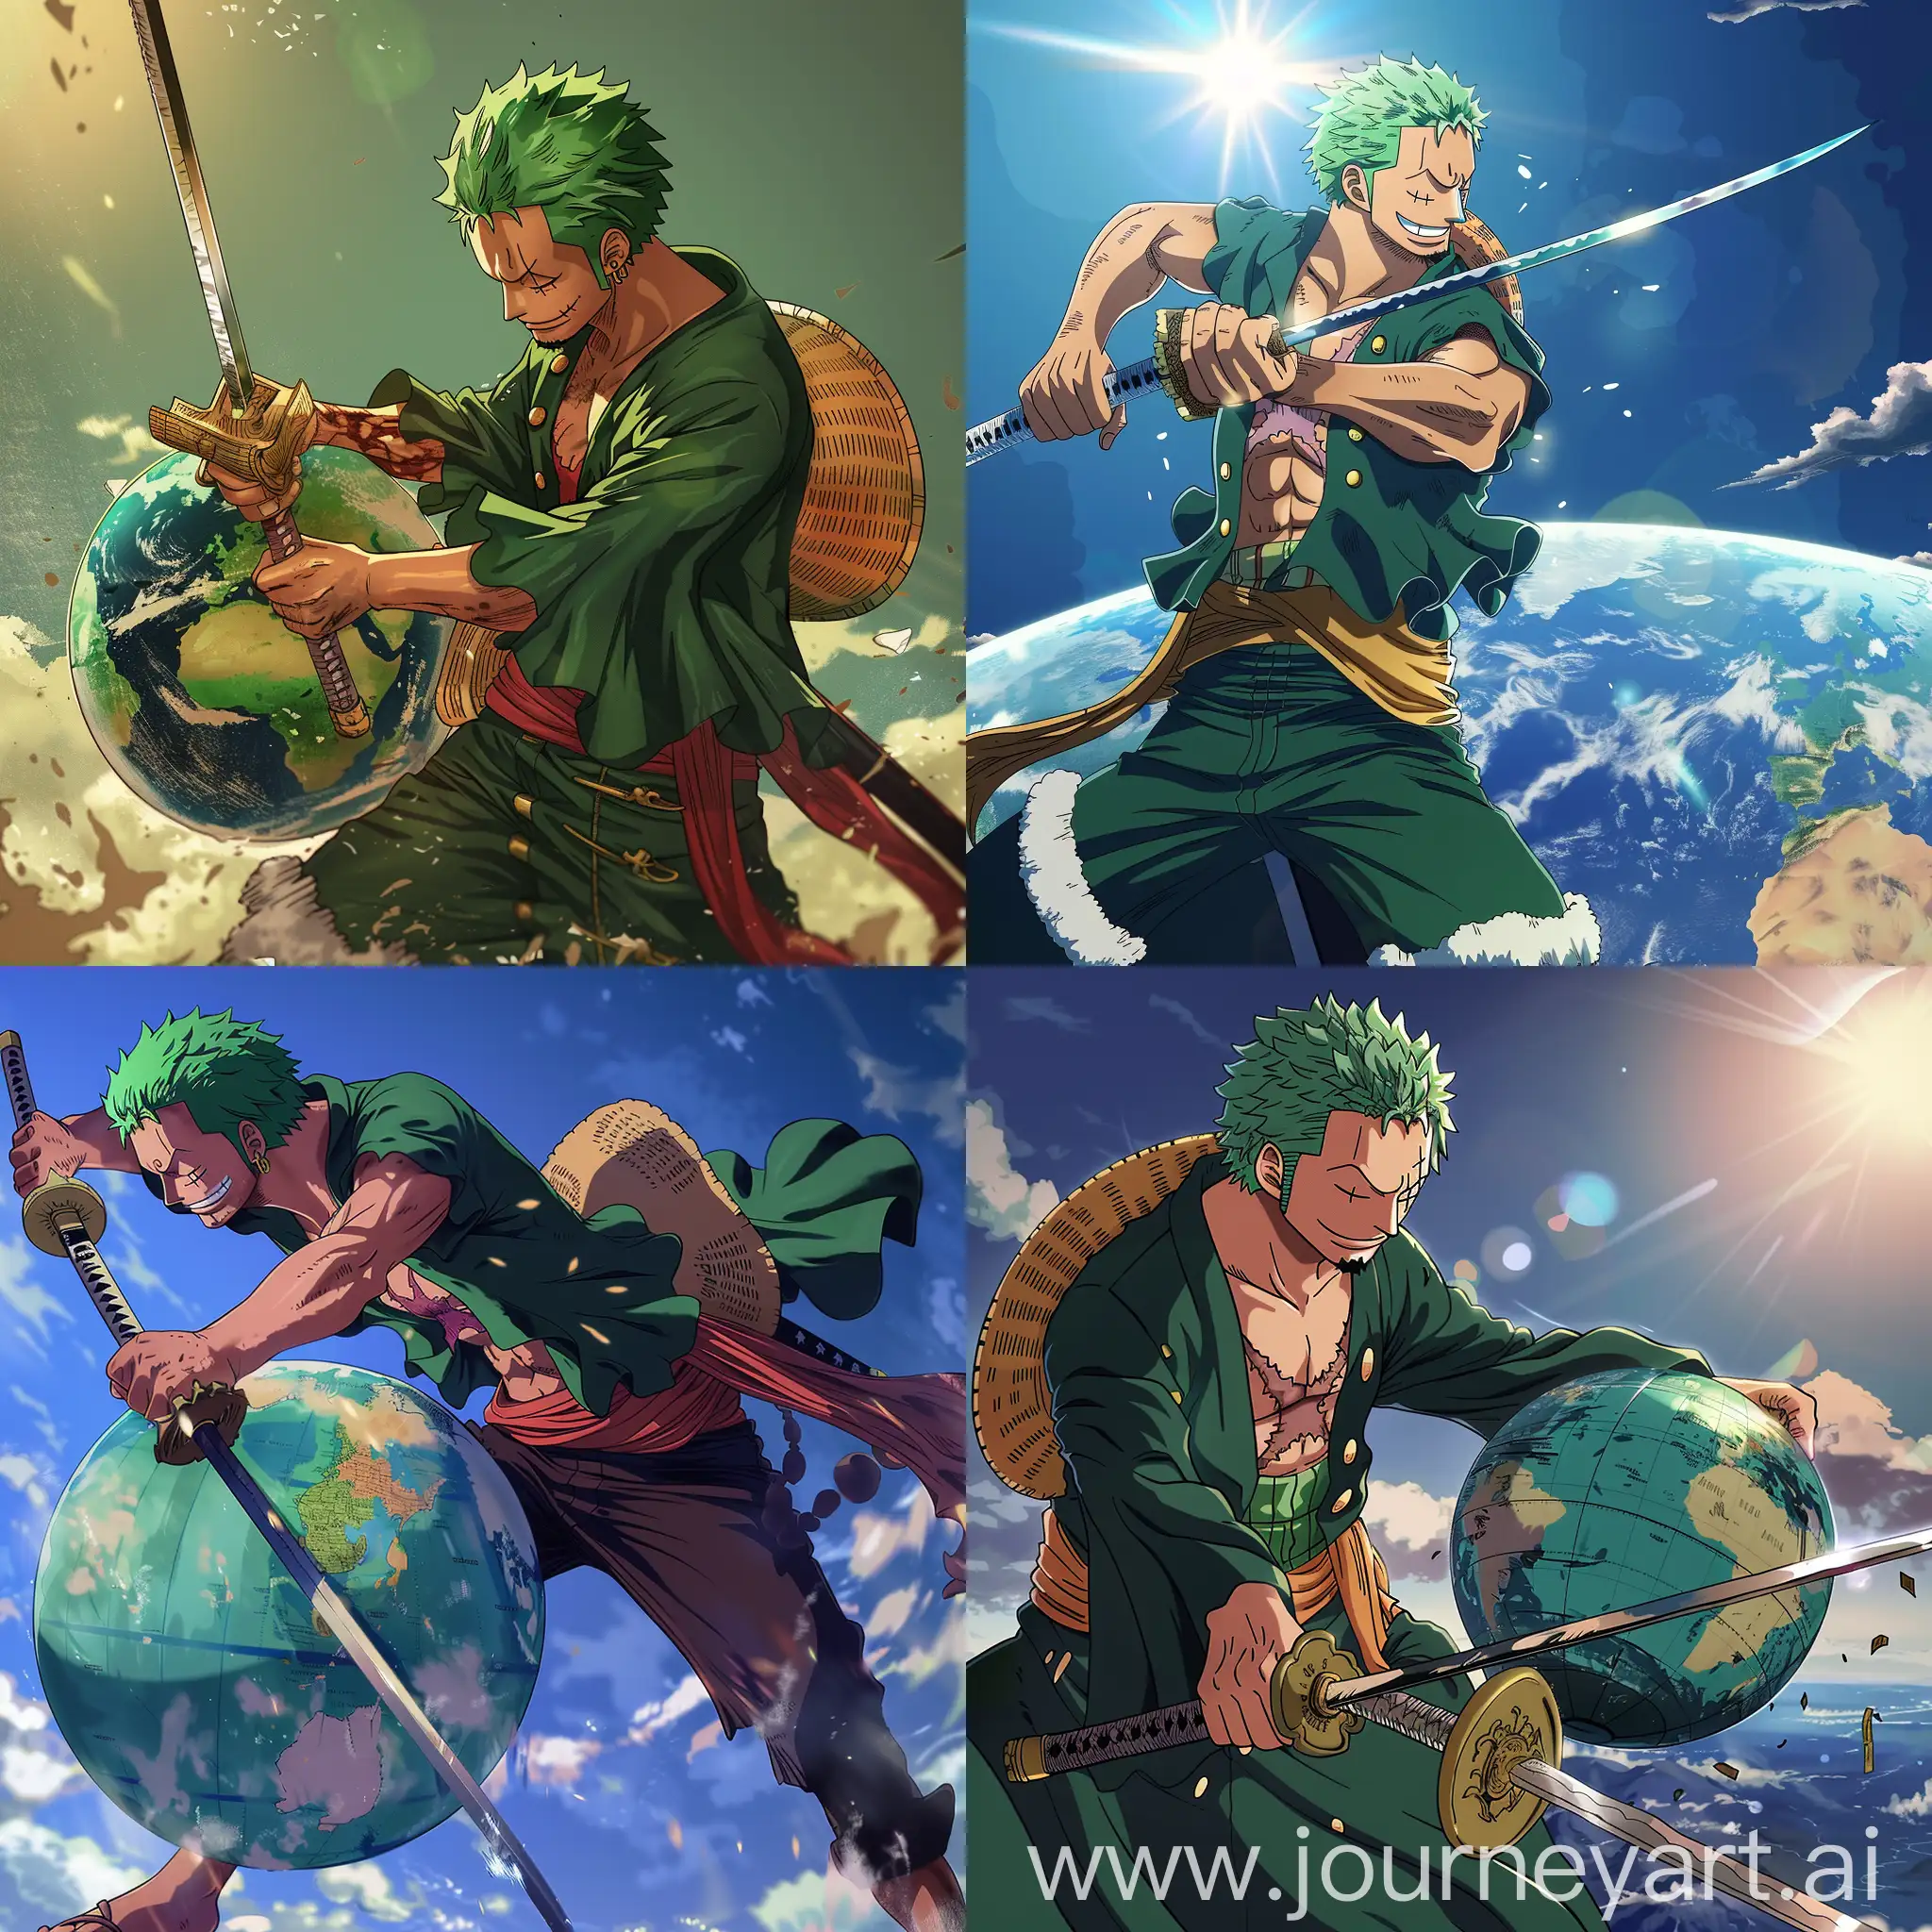 Roronoa Zoro cutting the globe in half with Enema's sword while wearing Vano's outfit, 4K